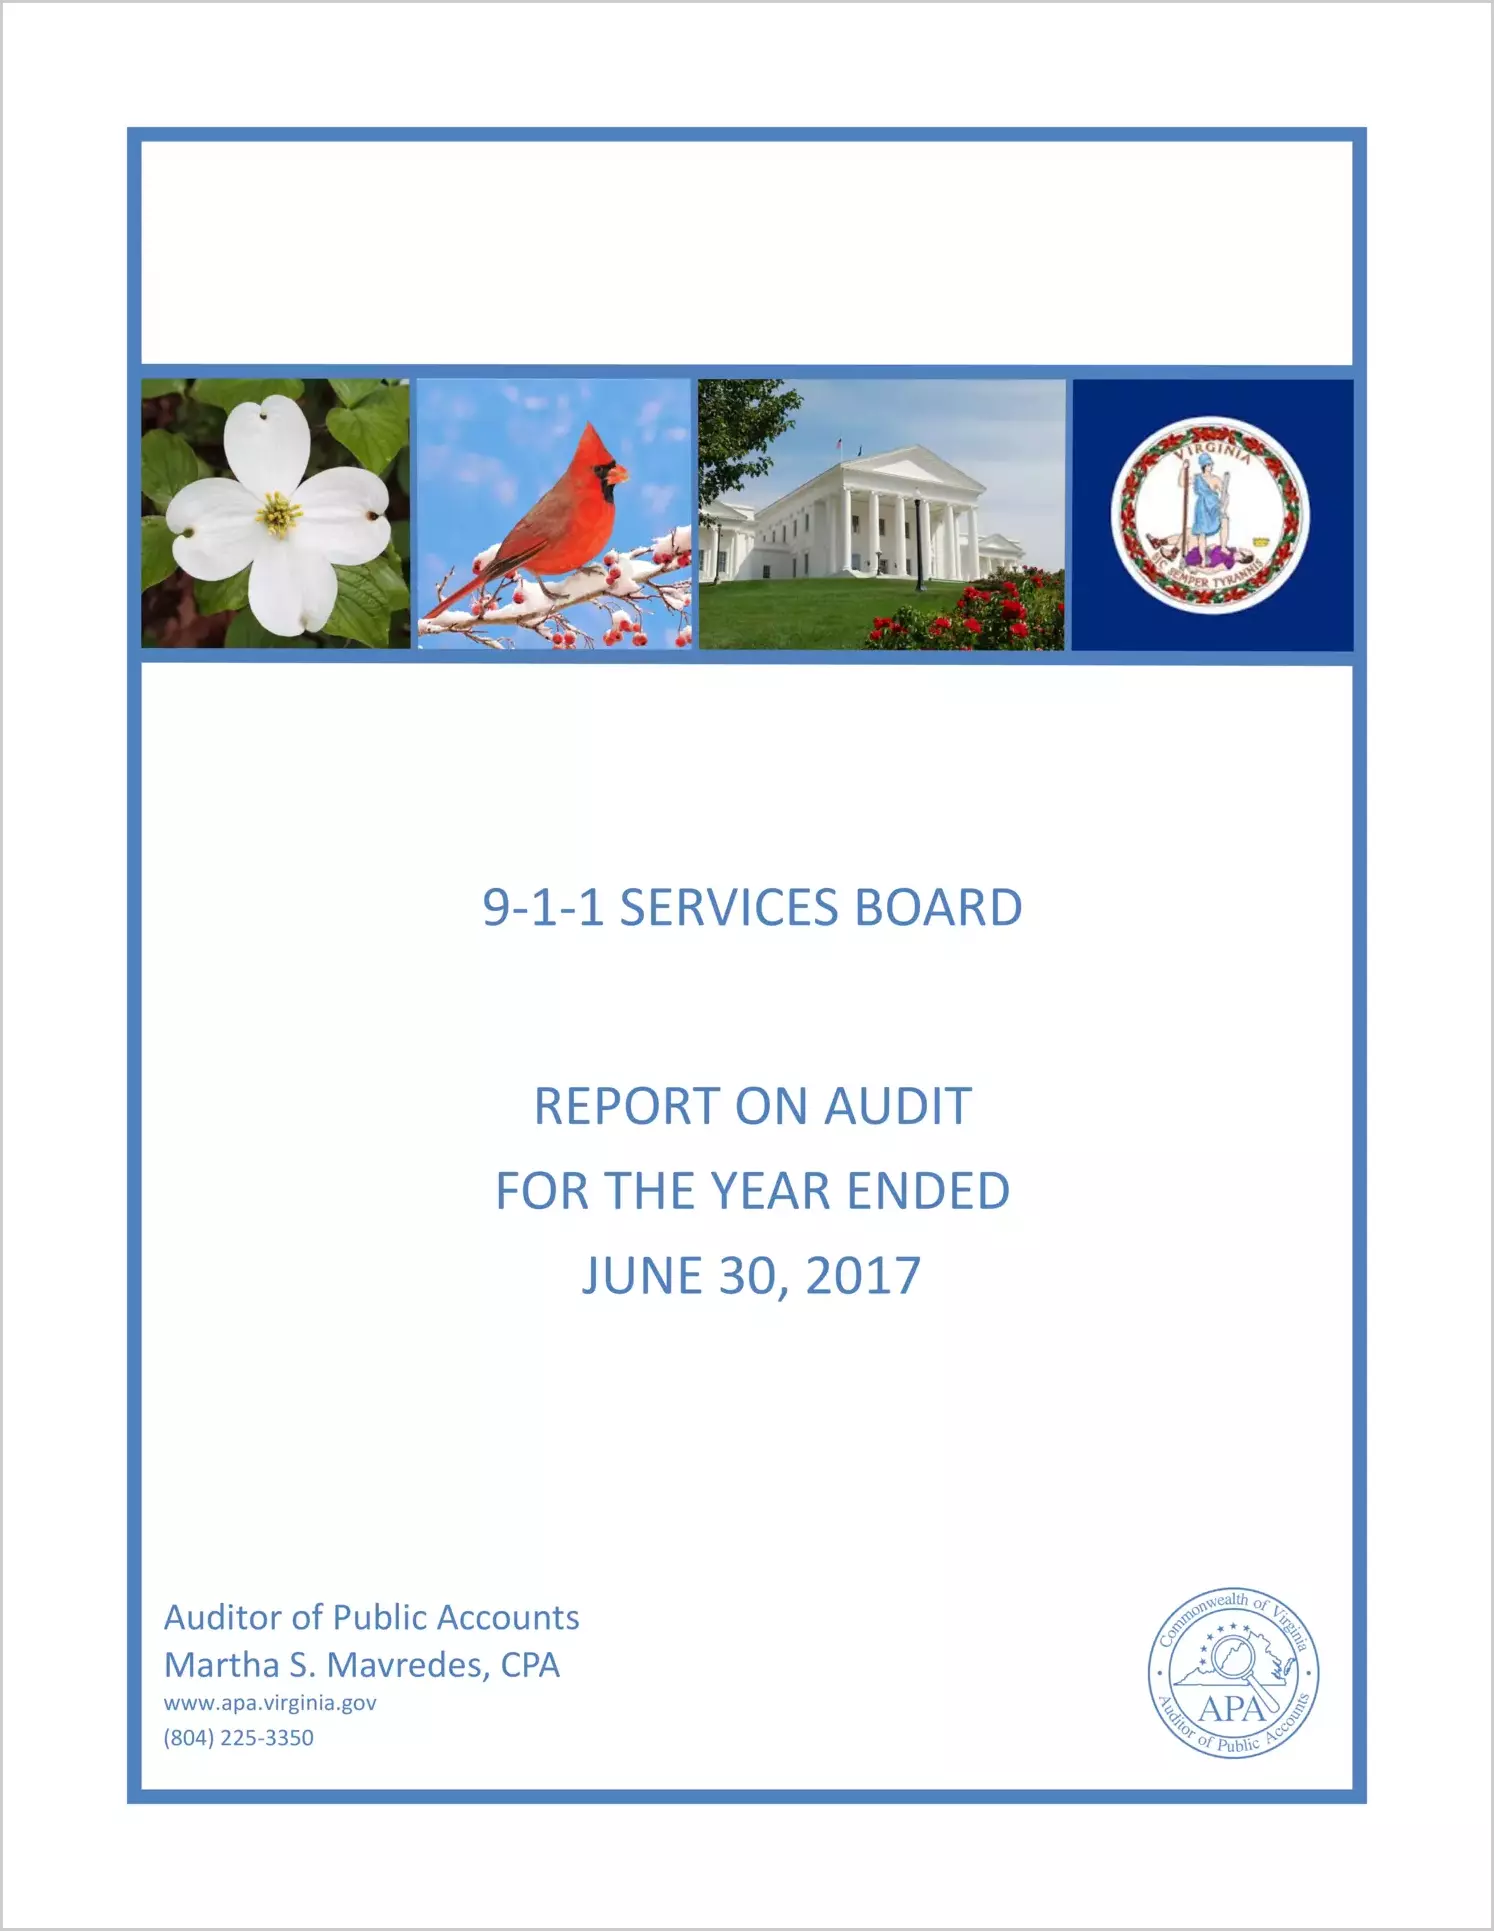 9-1-1 Services Board for the year ended June 30, 2017